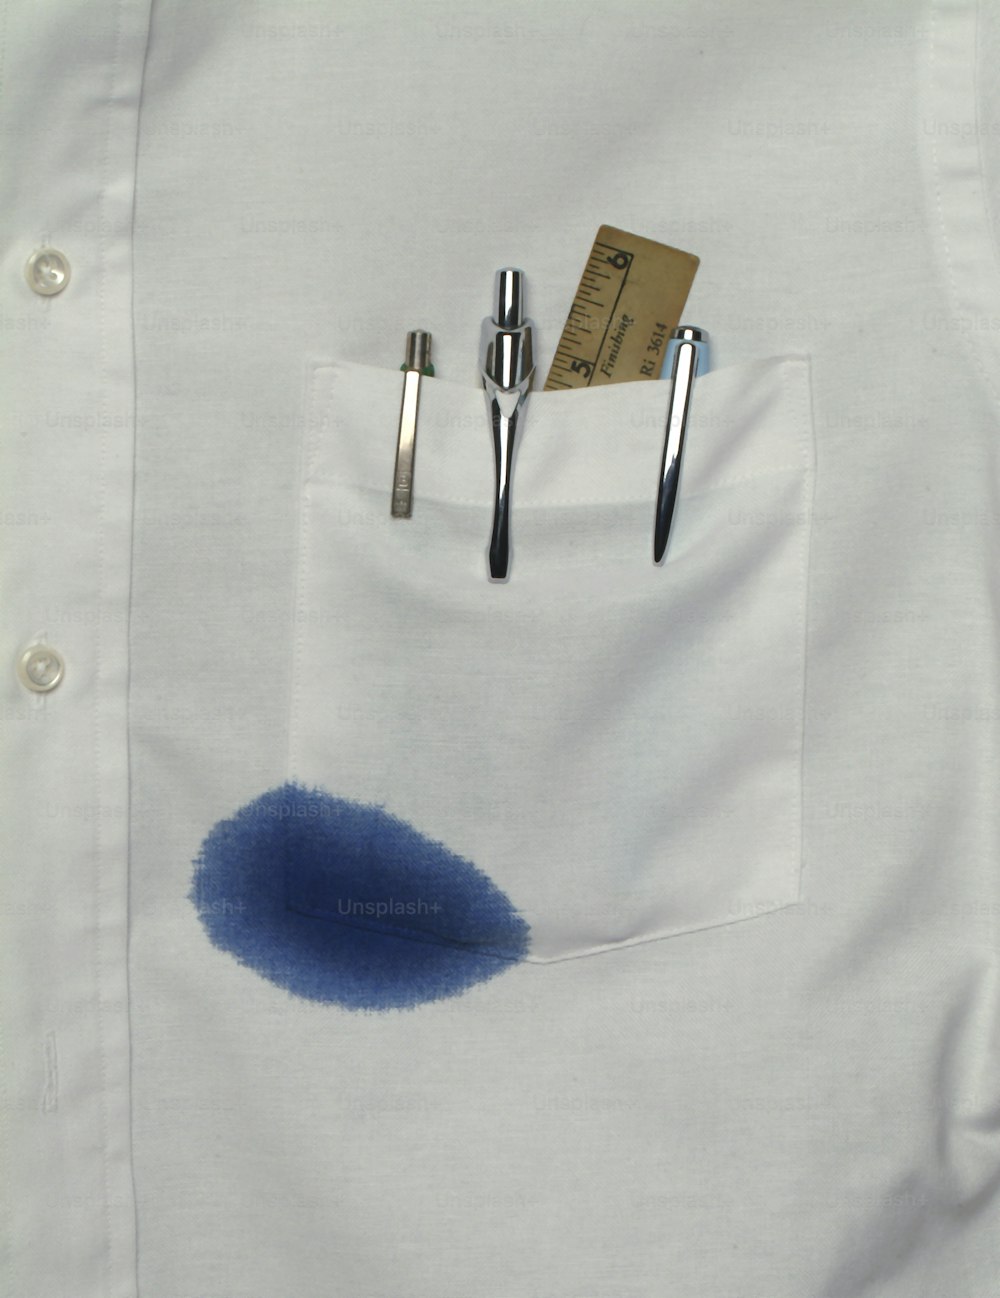 Close-up view of a shirt pocket that holds a ruler and several pens, one of which leaks blue ink, California, 1970s. (Photo by Tom Kelley/Getty Images)